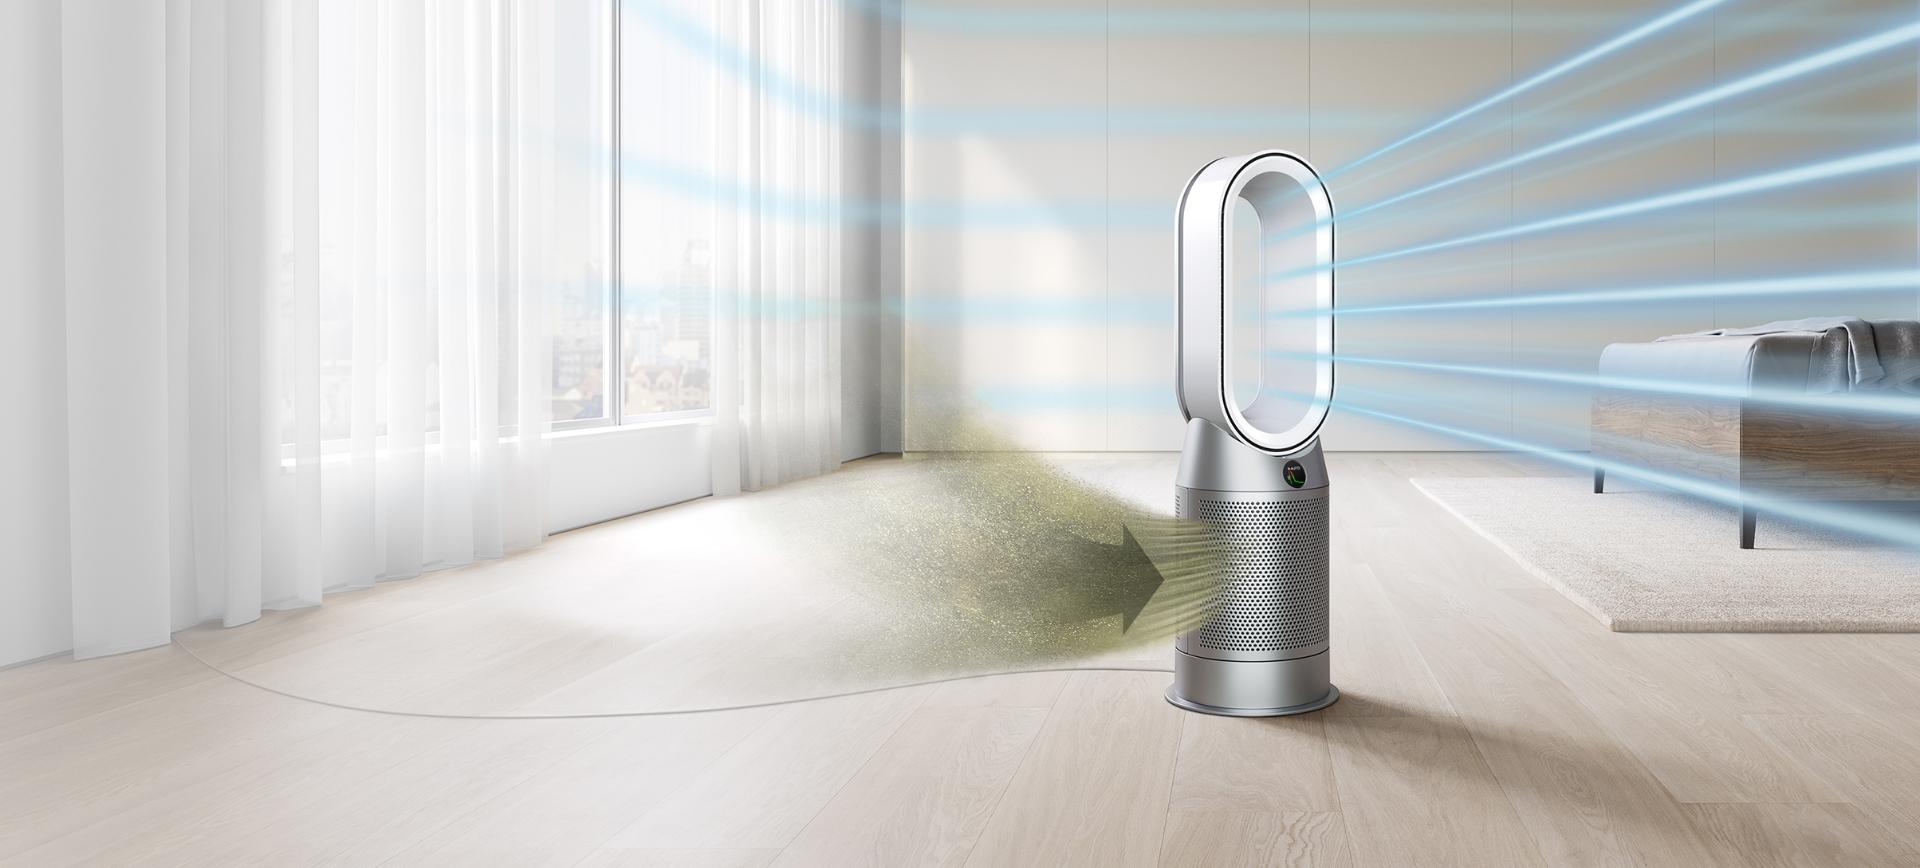 Dyson air purifier in a white room taking in dust particles while releasing blue light indicating cooling. 